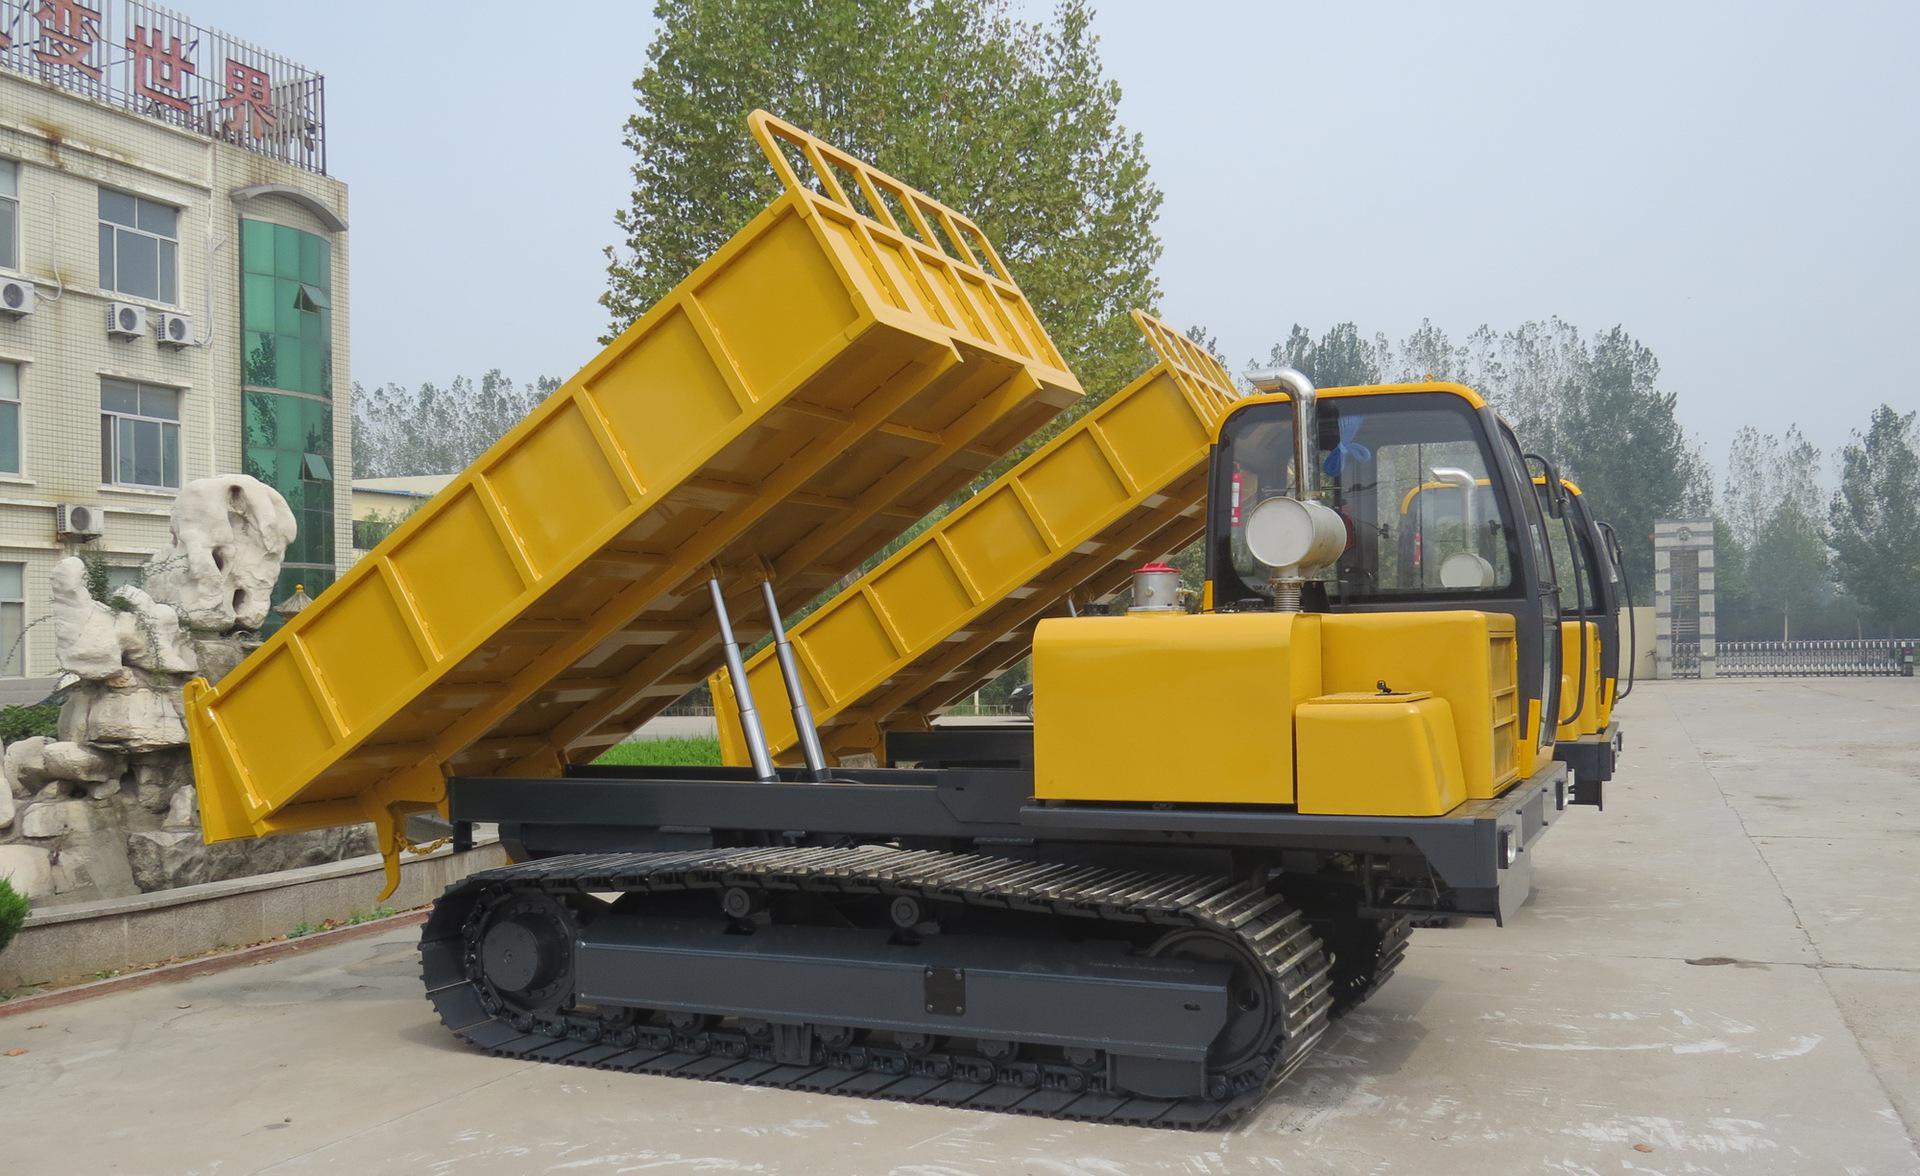 The big role of crawler trucks and small agricultural machinery